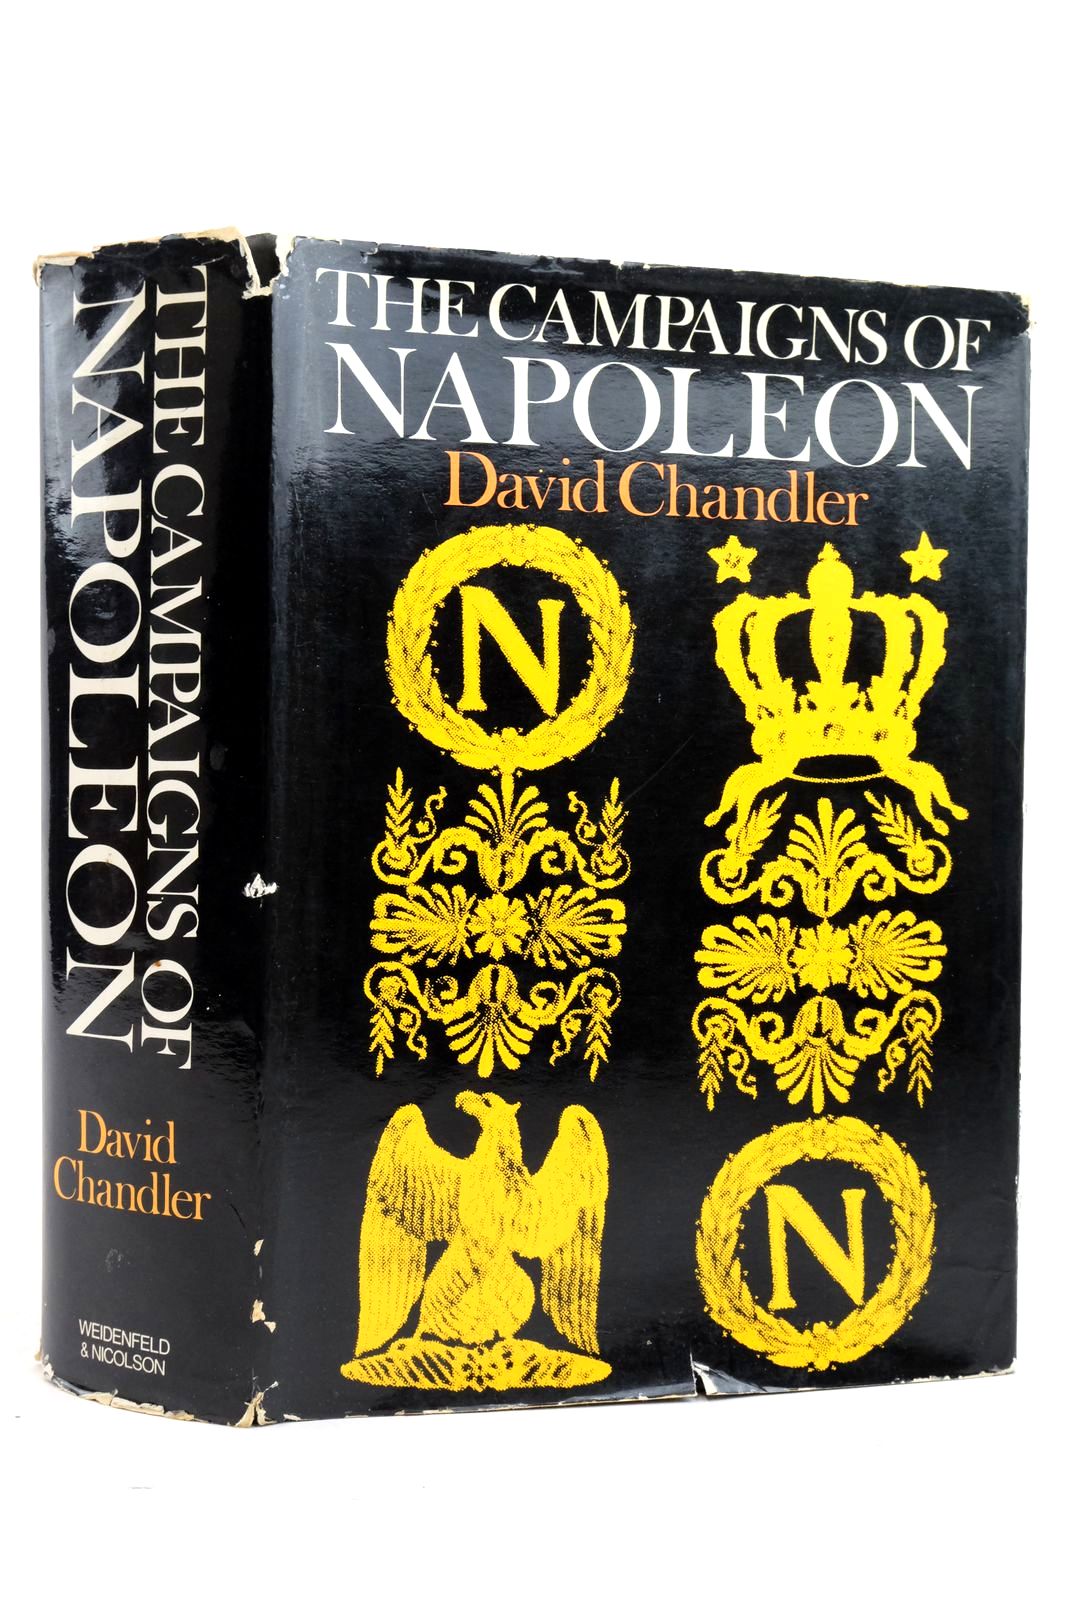 Photo of THE CAMPAIGNS OF NAPOLEON written by Chandler, David G. published by Weidenfeld and Nicolson (STOCK CODE: 2136214)  for sale by Stella & Rose's Books